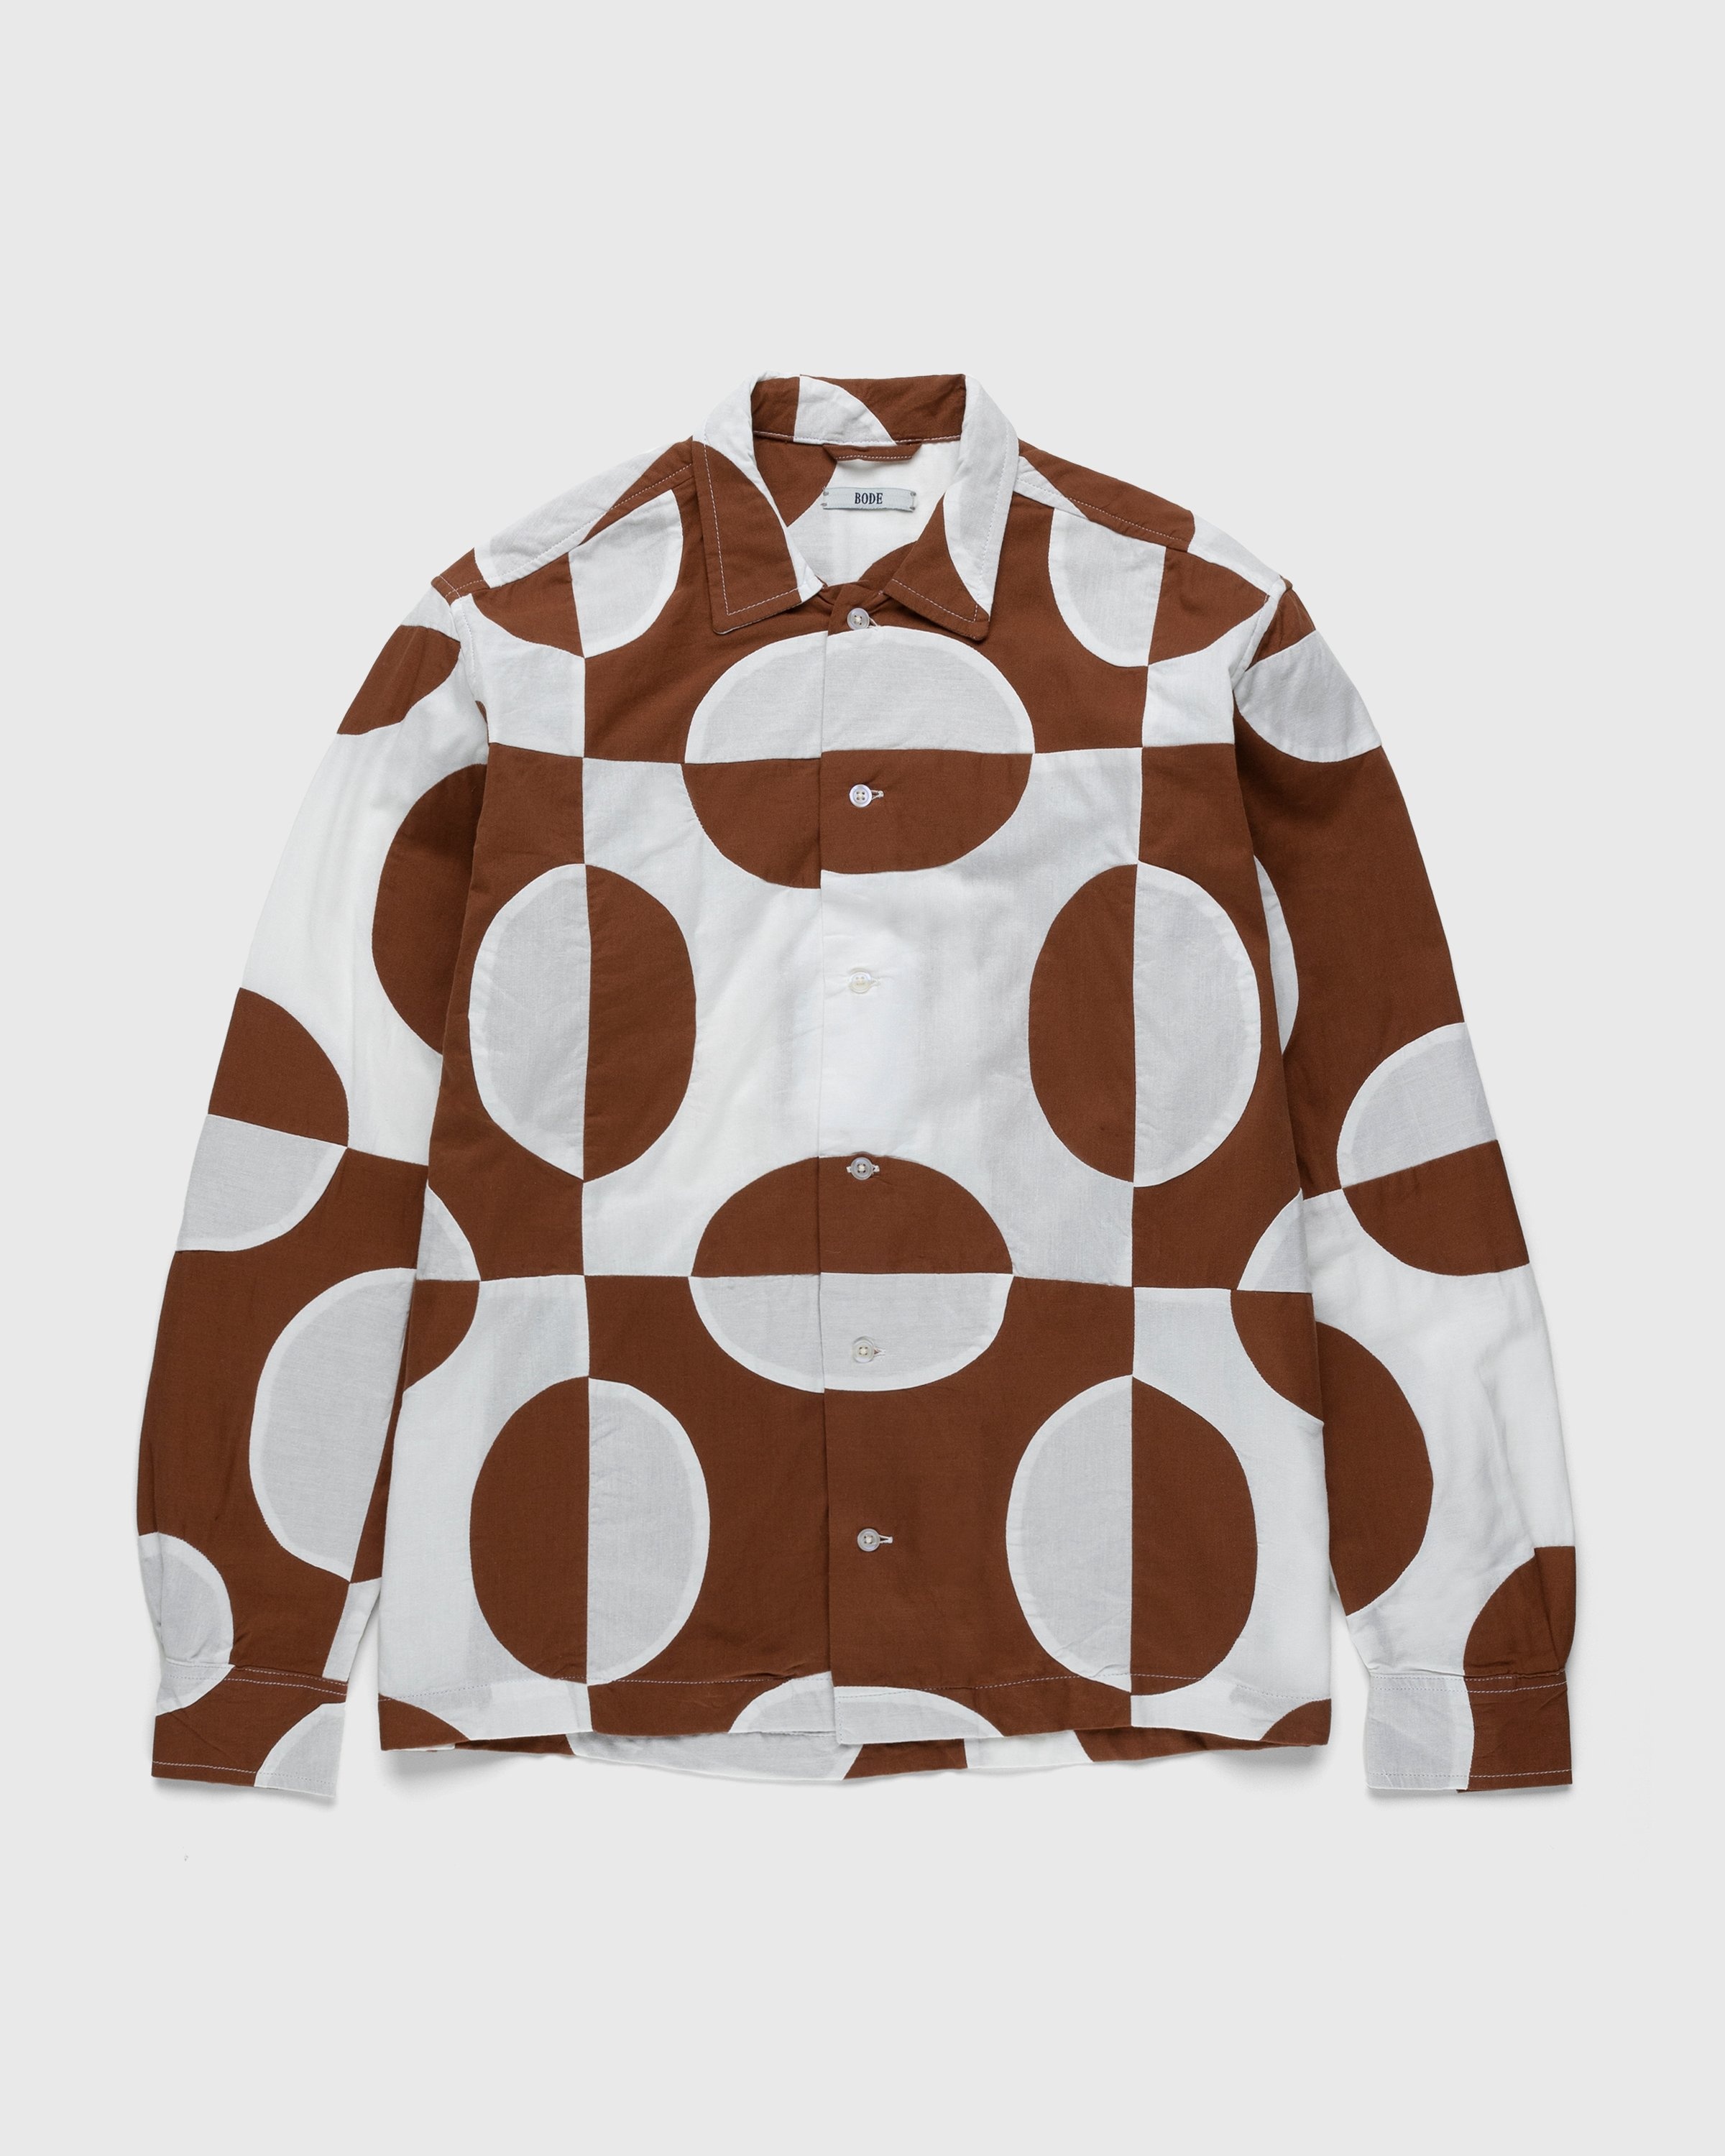 Bode – Duo Oval Patchwork Long-Sleeve Shirt Brown - Longsleeve Shirts - Multi - Image 1